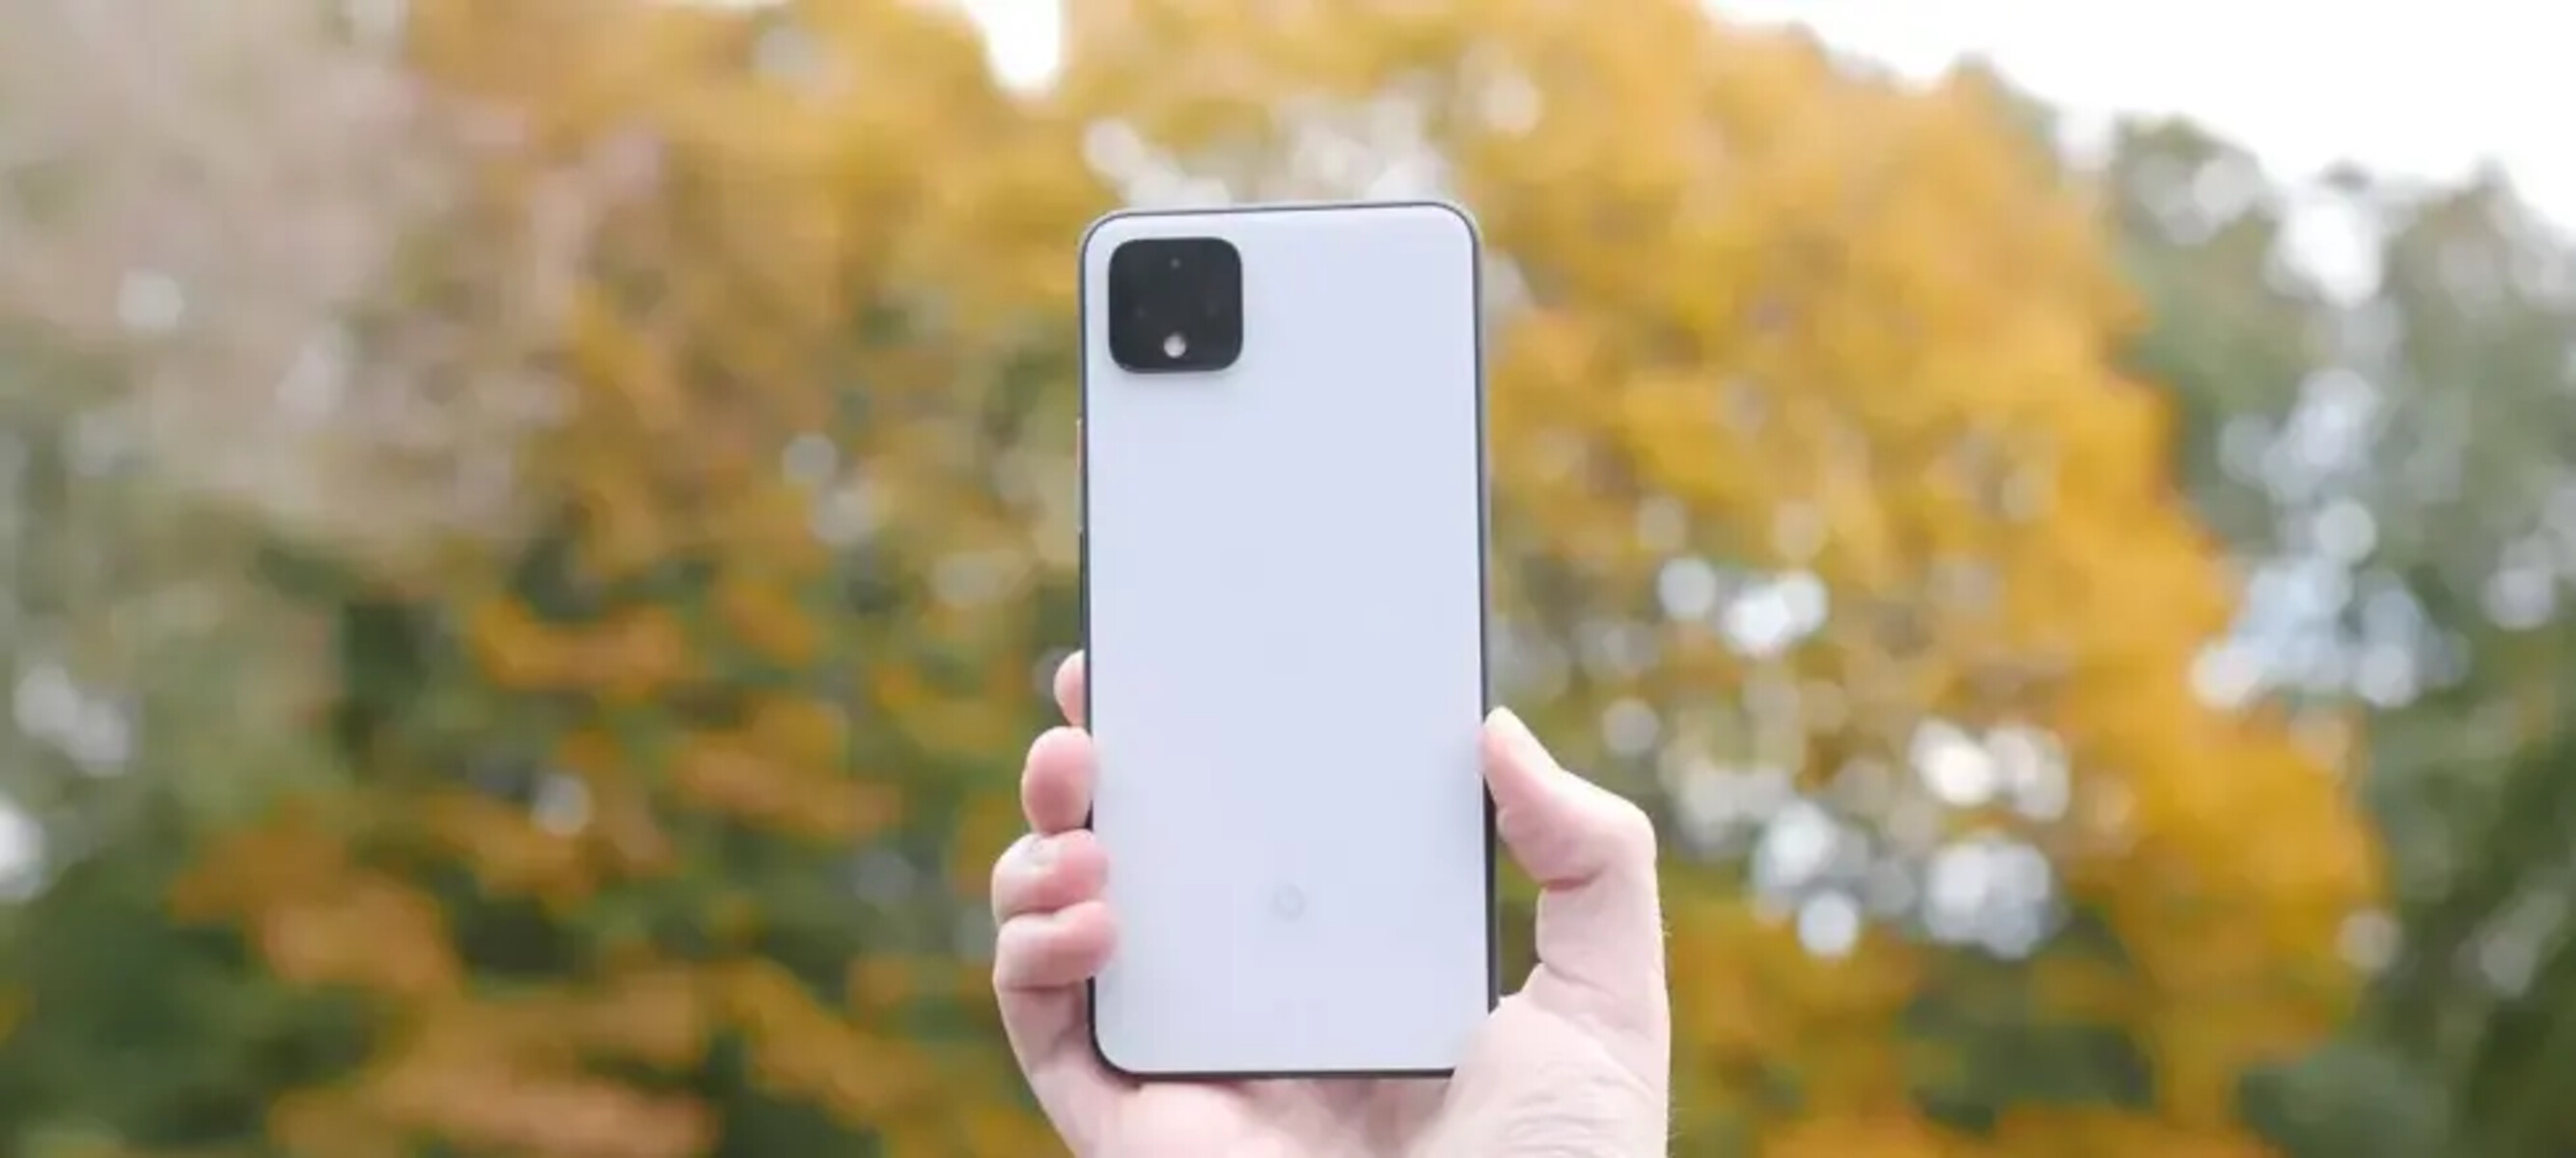 Google Pixel 4: Compatible Carriers And Network Support